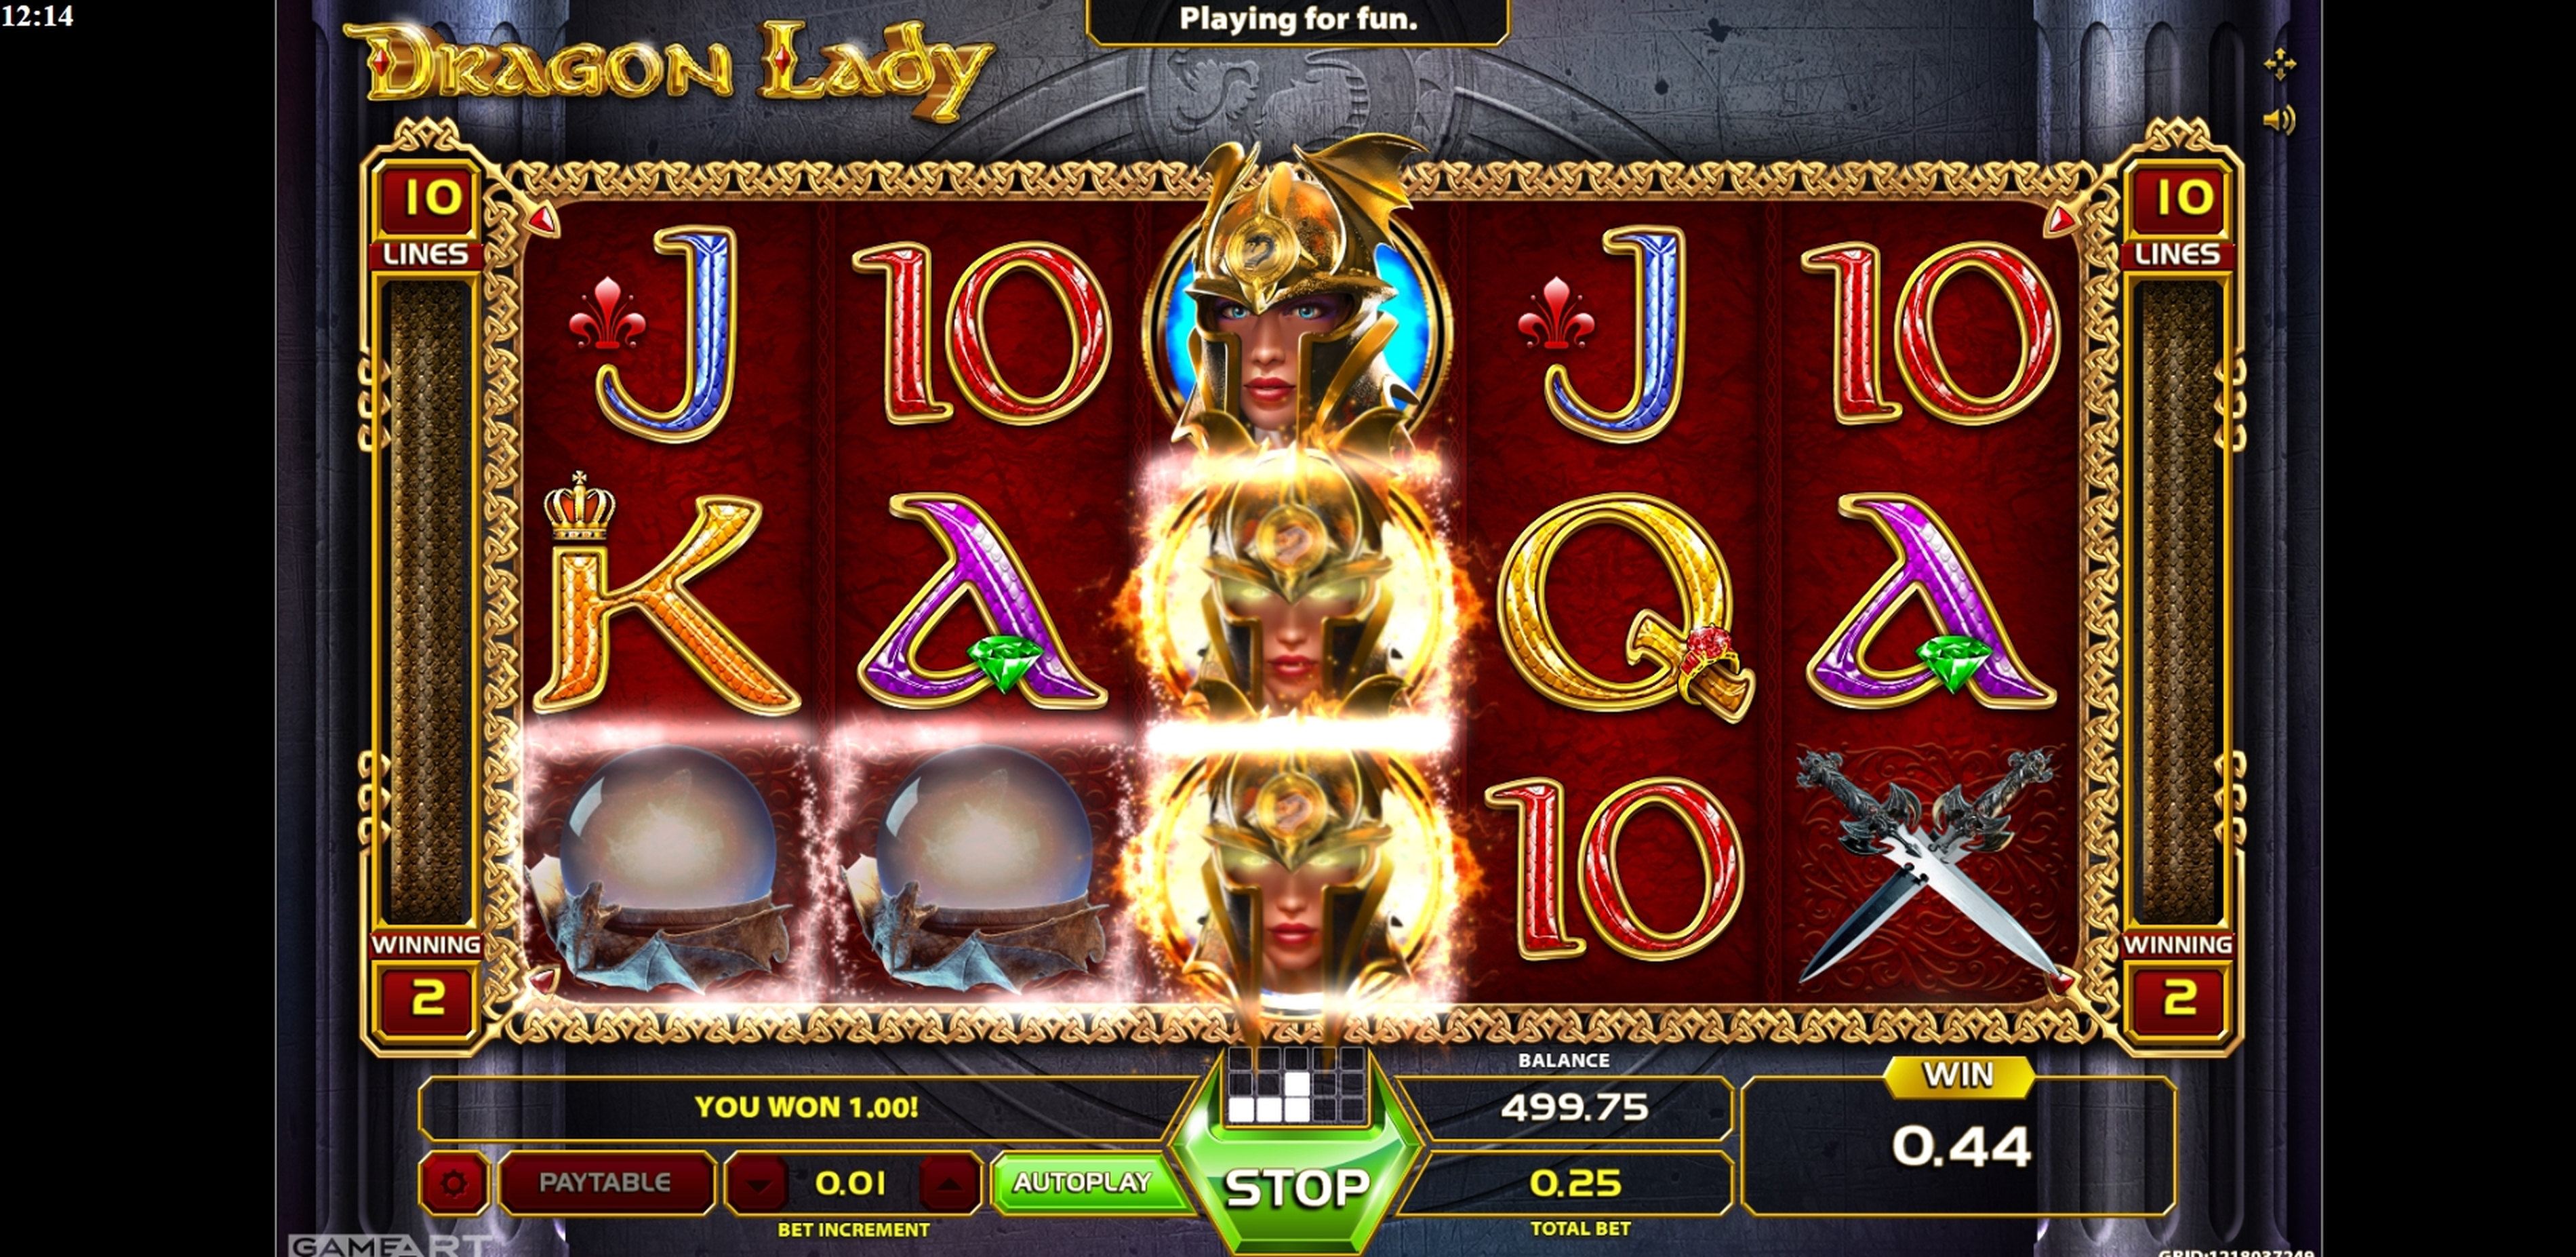 Win Money in Dragon Lady Free Slot Game by GameArt